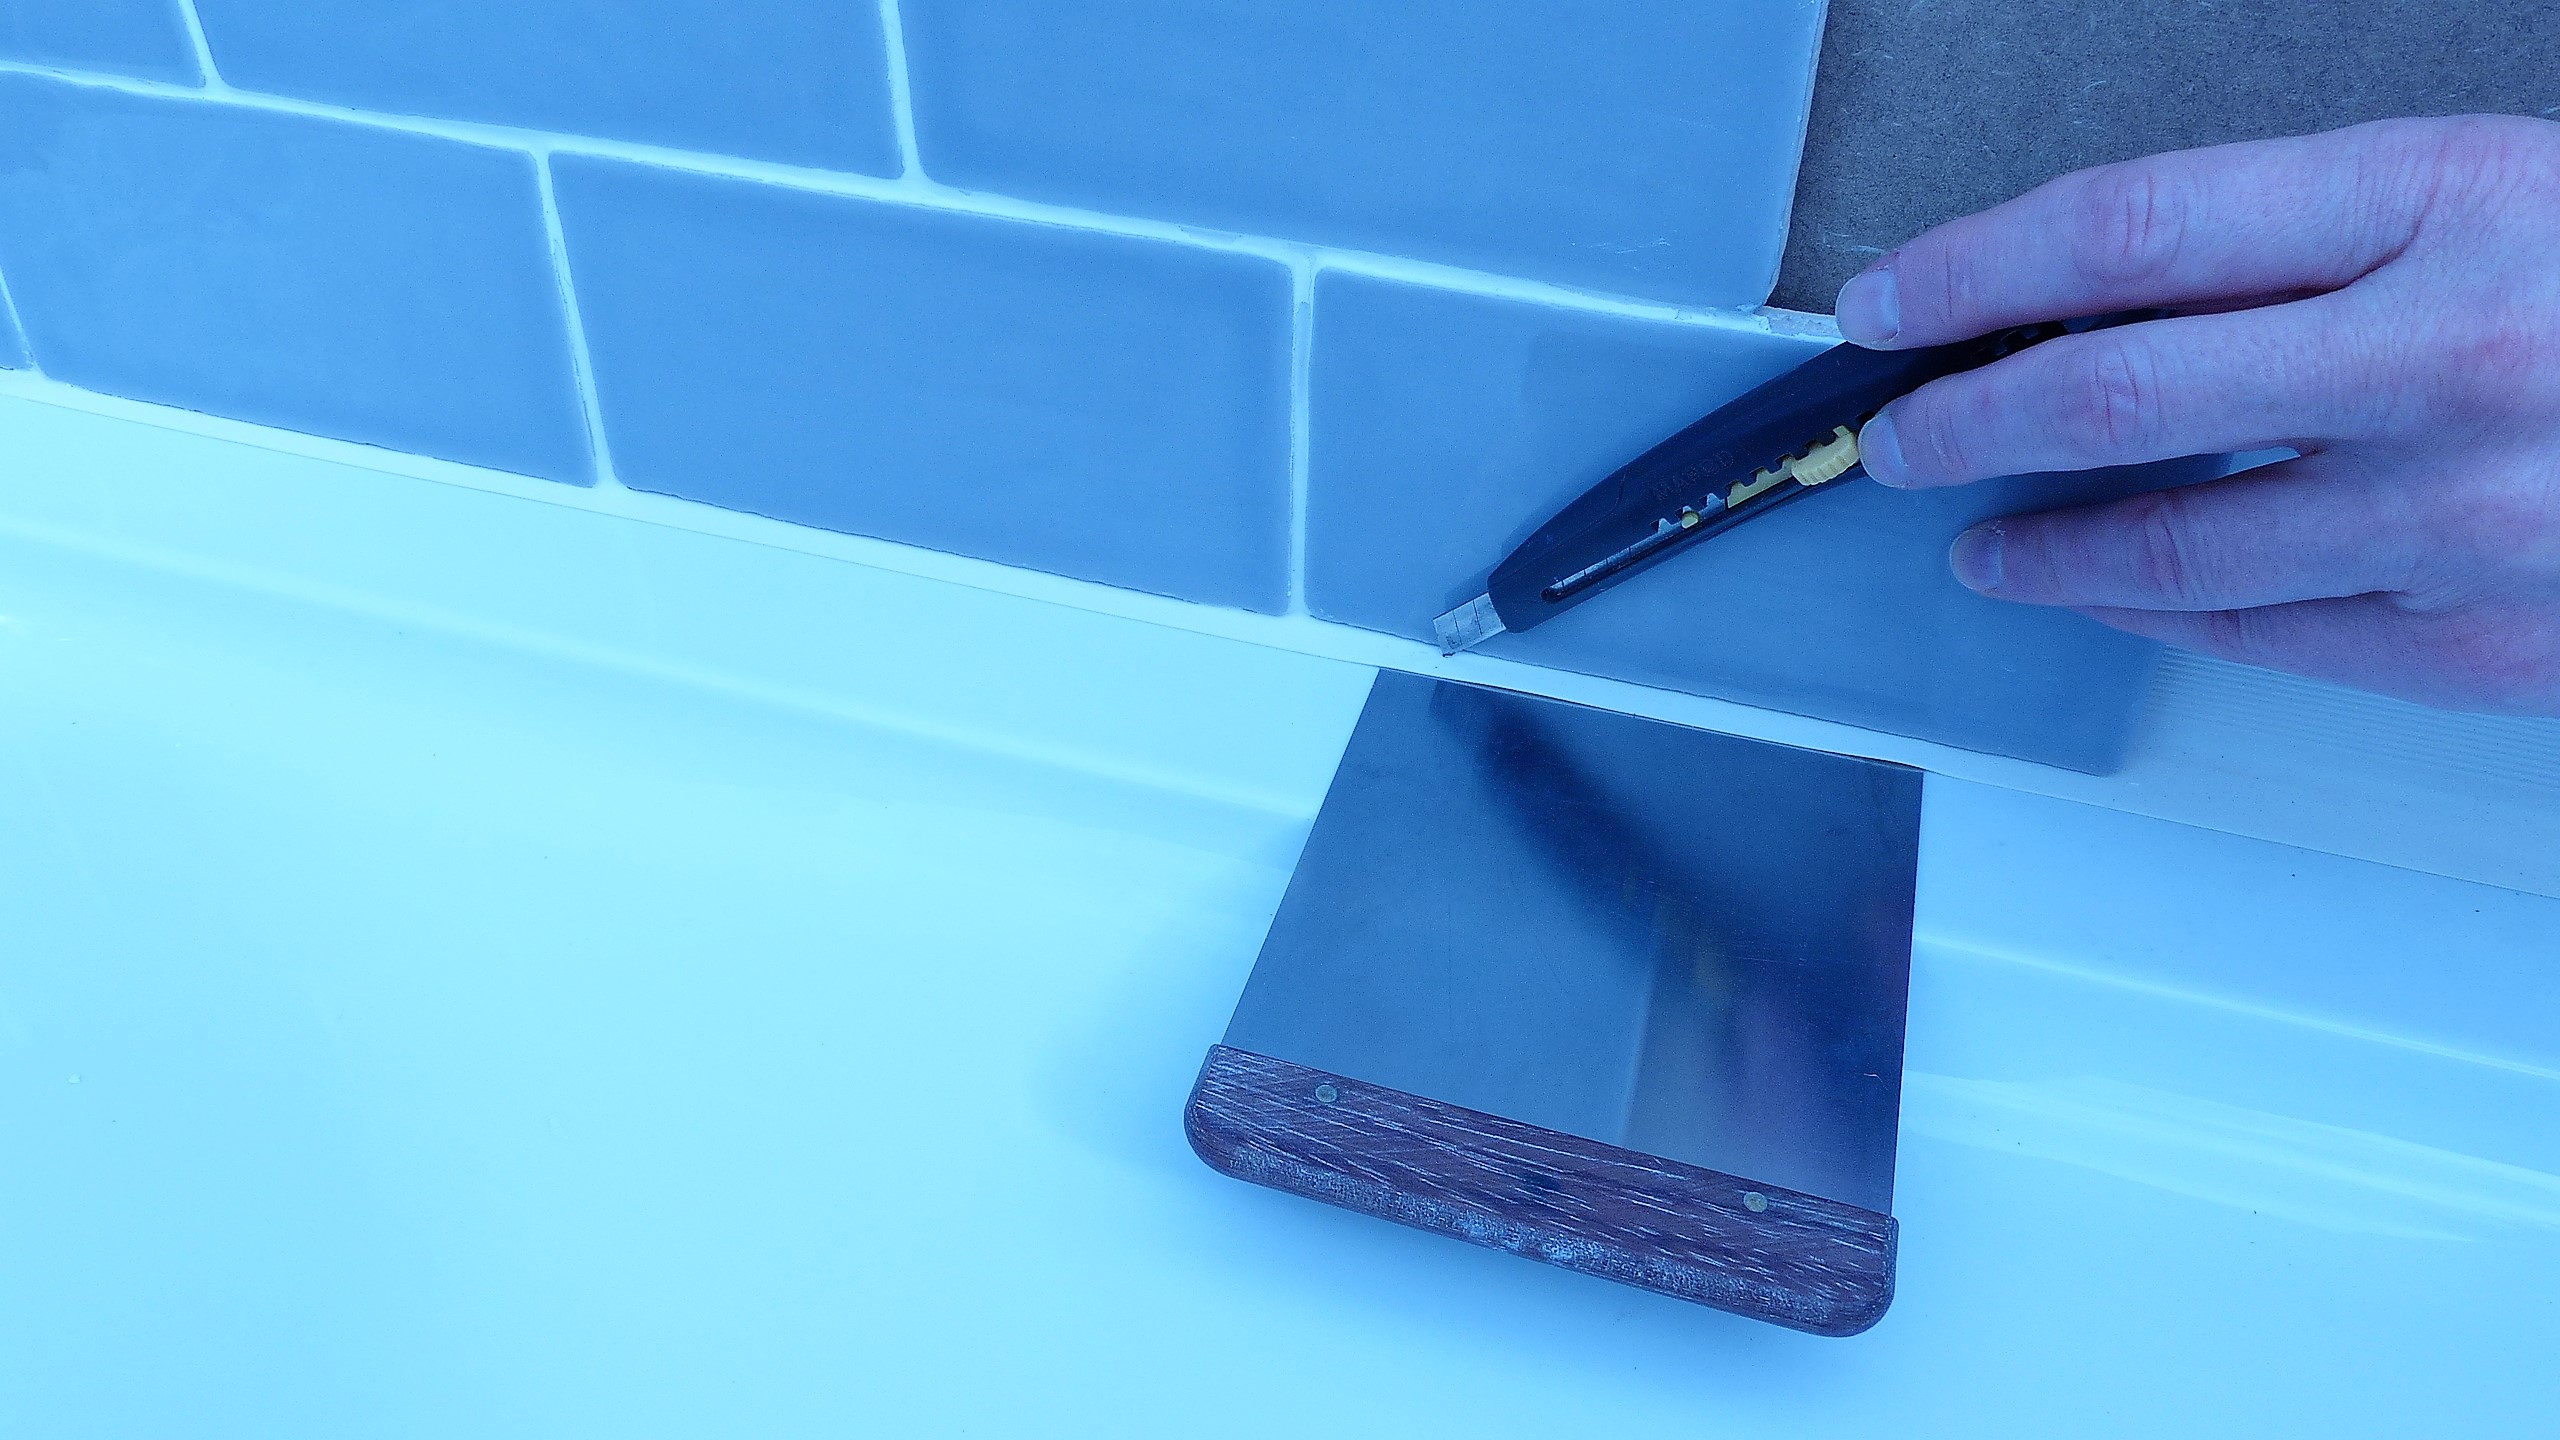 Waterstop seals tiles, shower trays, baths and kitchen work surfaces